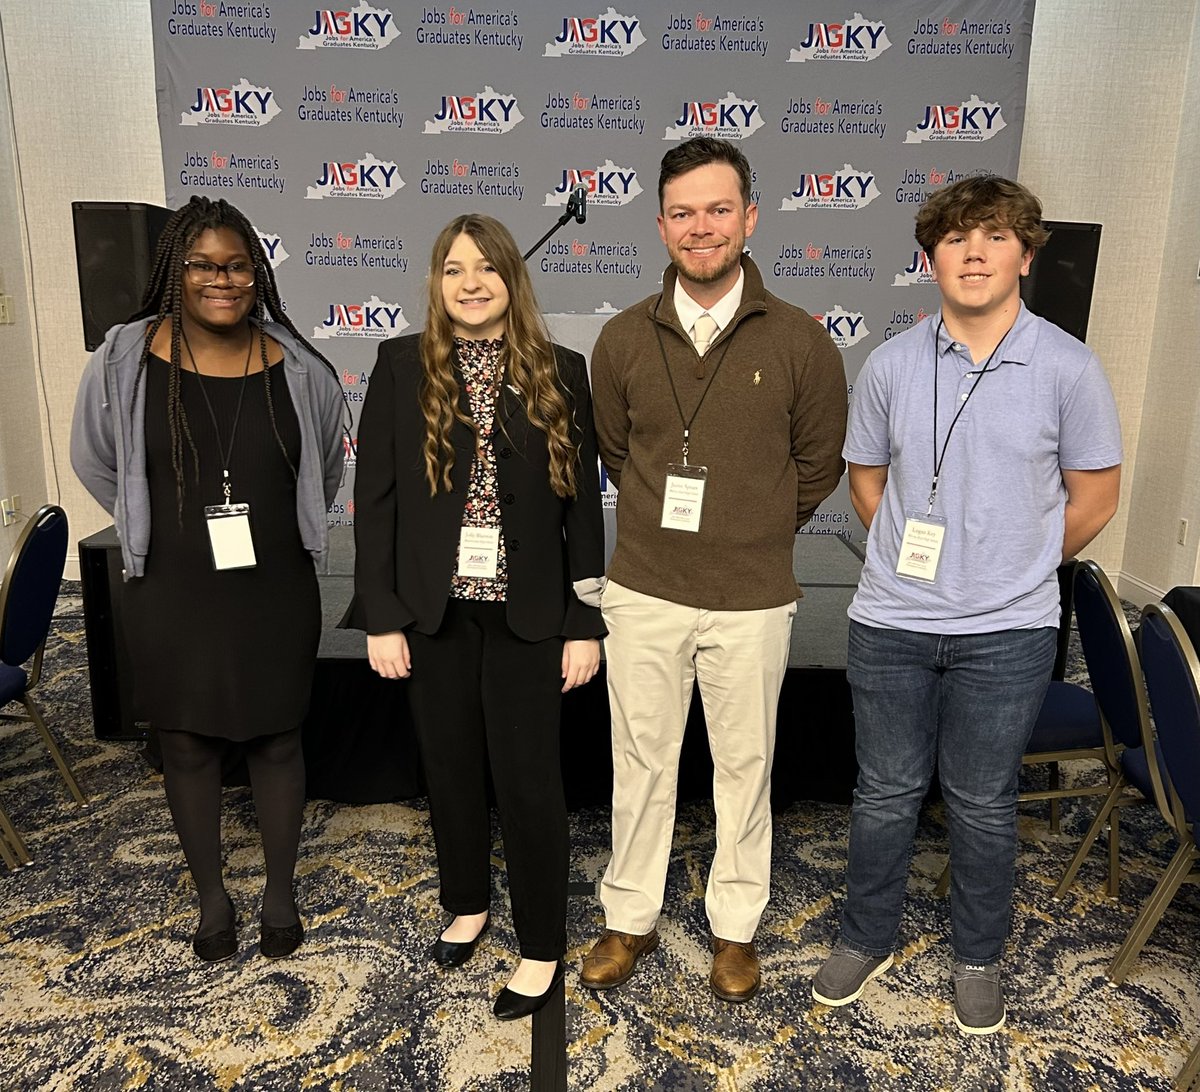 We have made it to Lexington! The state qualifying team for Knowledge Bowl of Dezyre Morrison, Jolly Banton and Logan Key compete at 2:50 today. #JAGKY 🔴⚪️ @WEHSRaiders @JAGkentucky @JAGnational